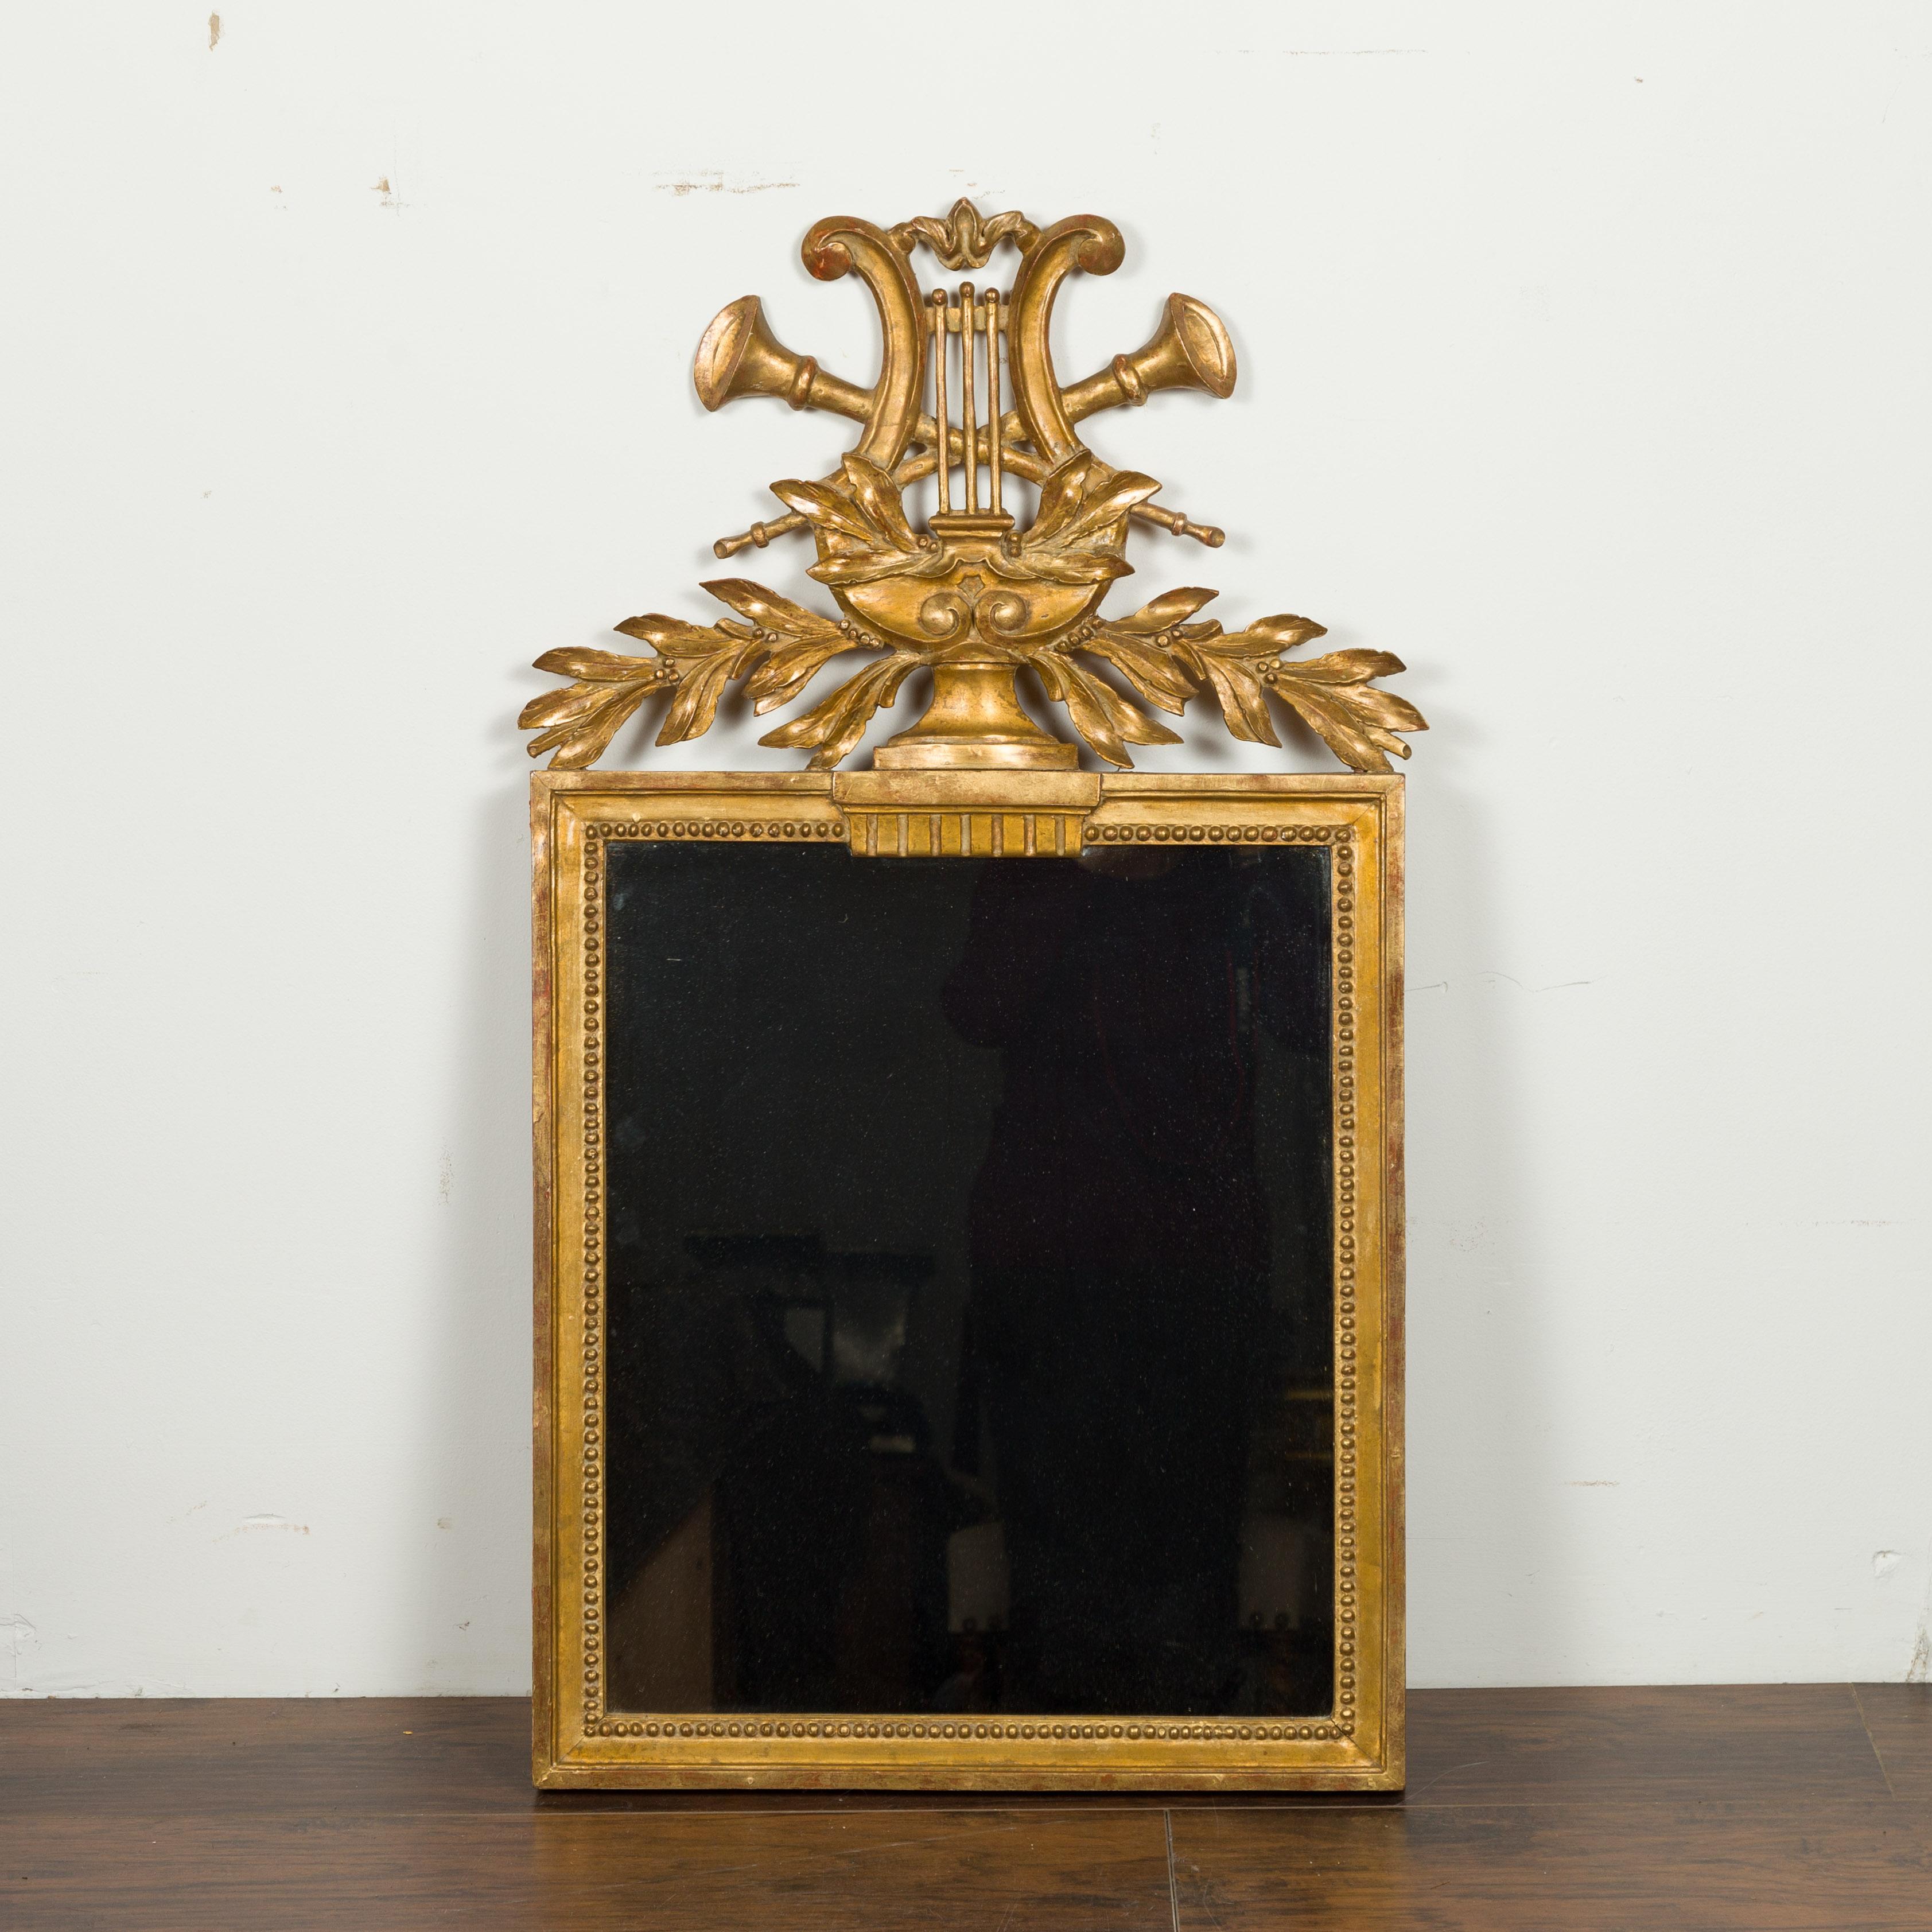 A French giltwood crested mirror from the early 20th century, with carved Music Allegory. Created in France during the early years of the 20th century, this exquisite mirror features a carved lyre and two woodwind instruments. Accented with olive